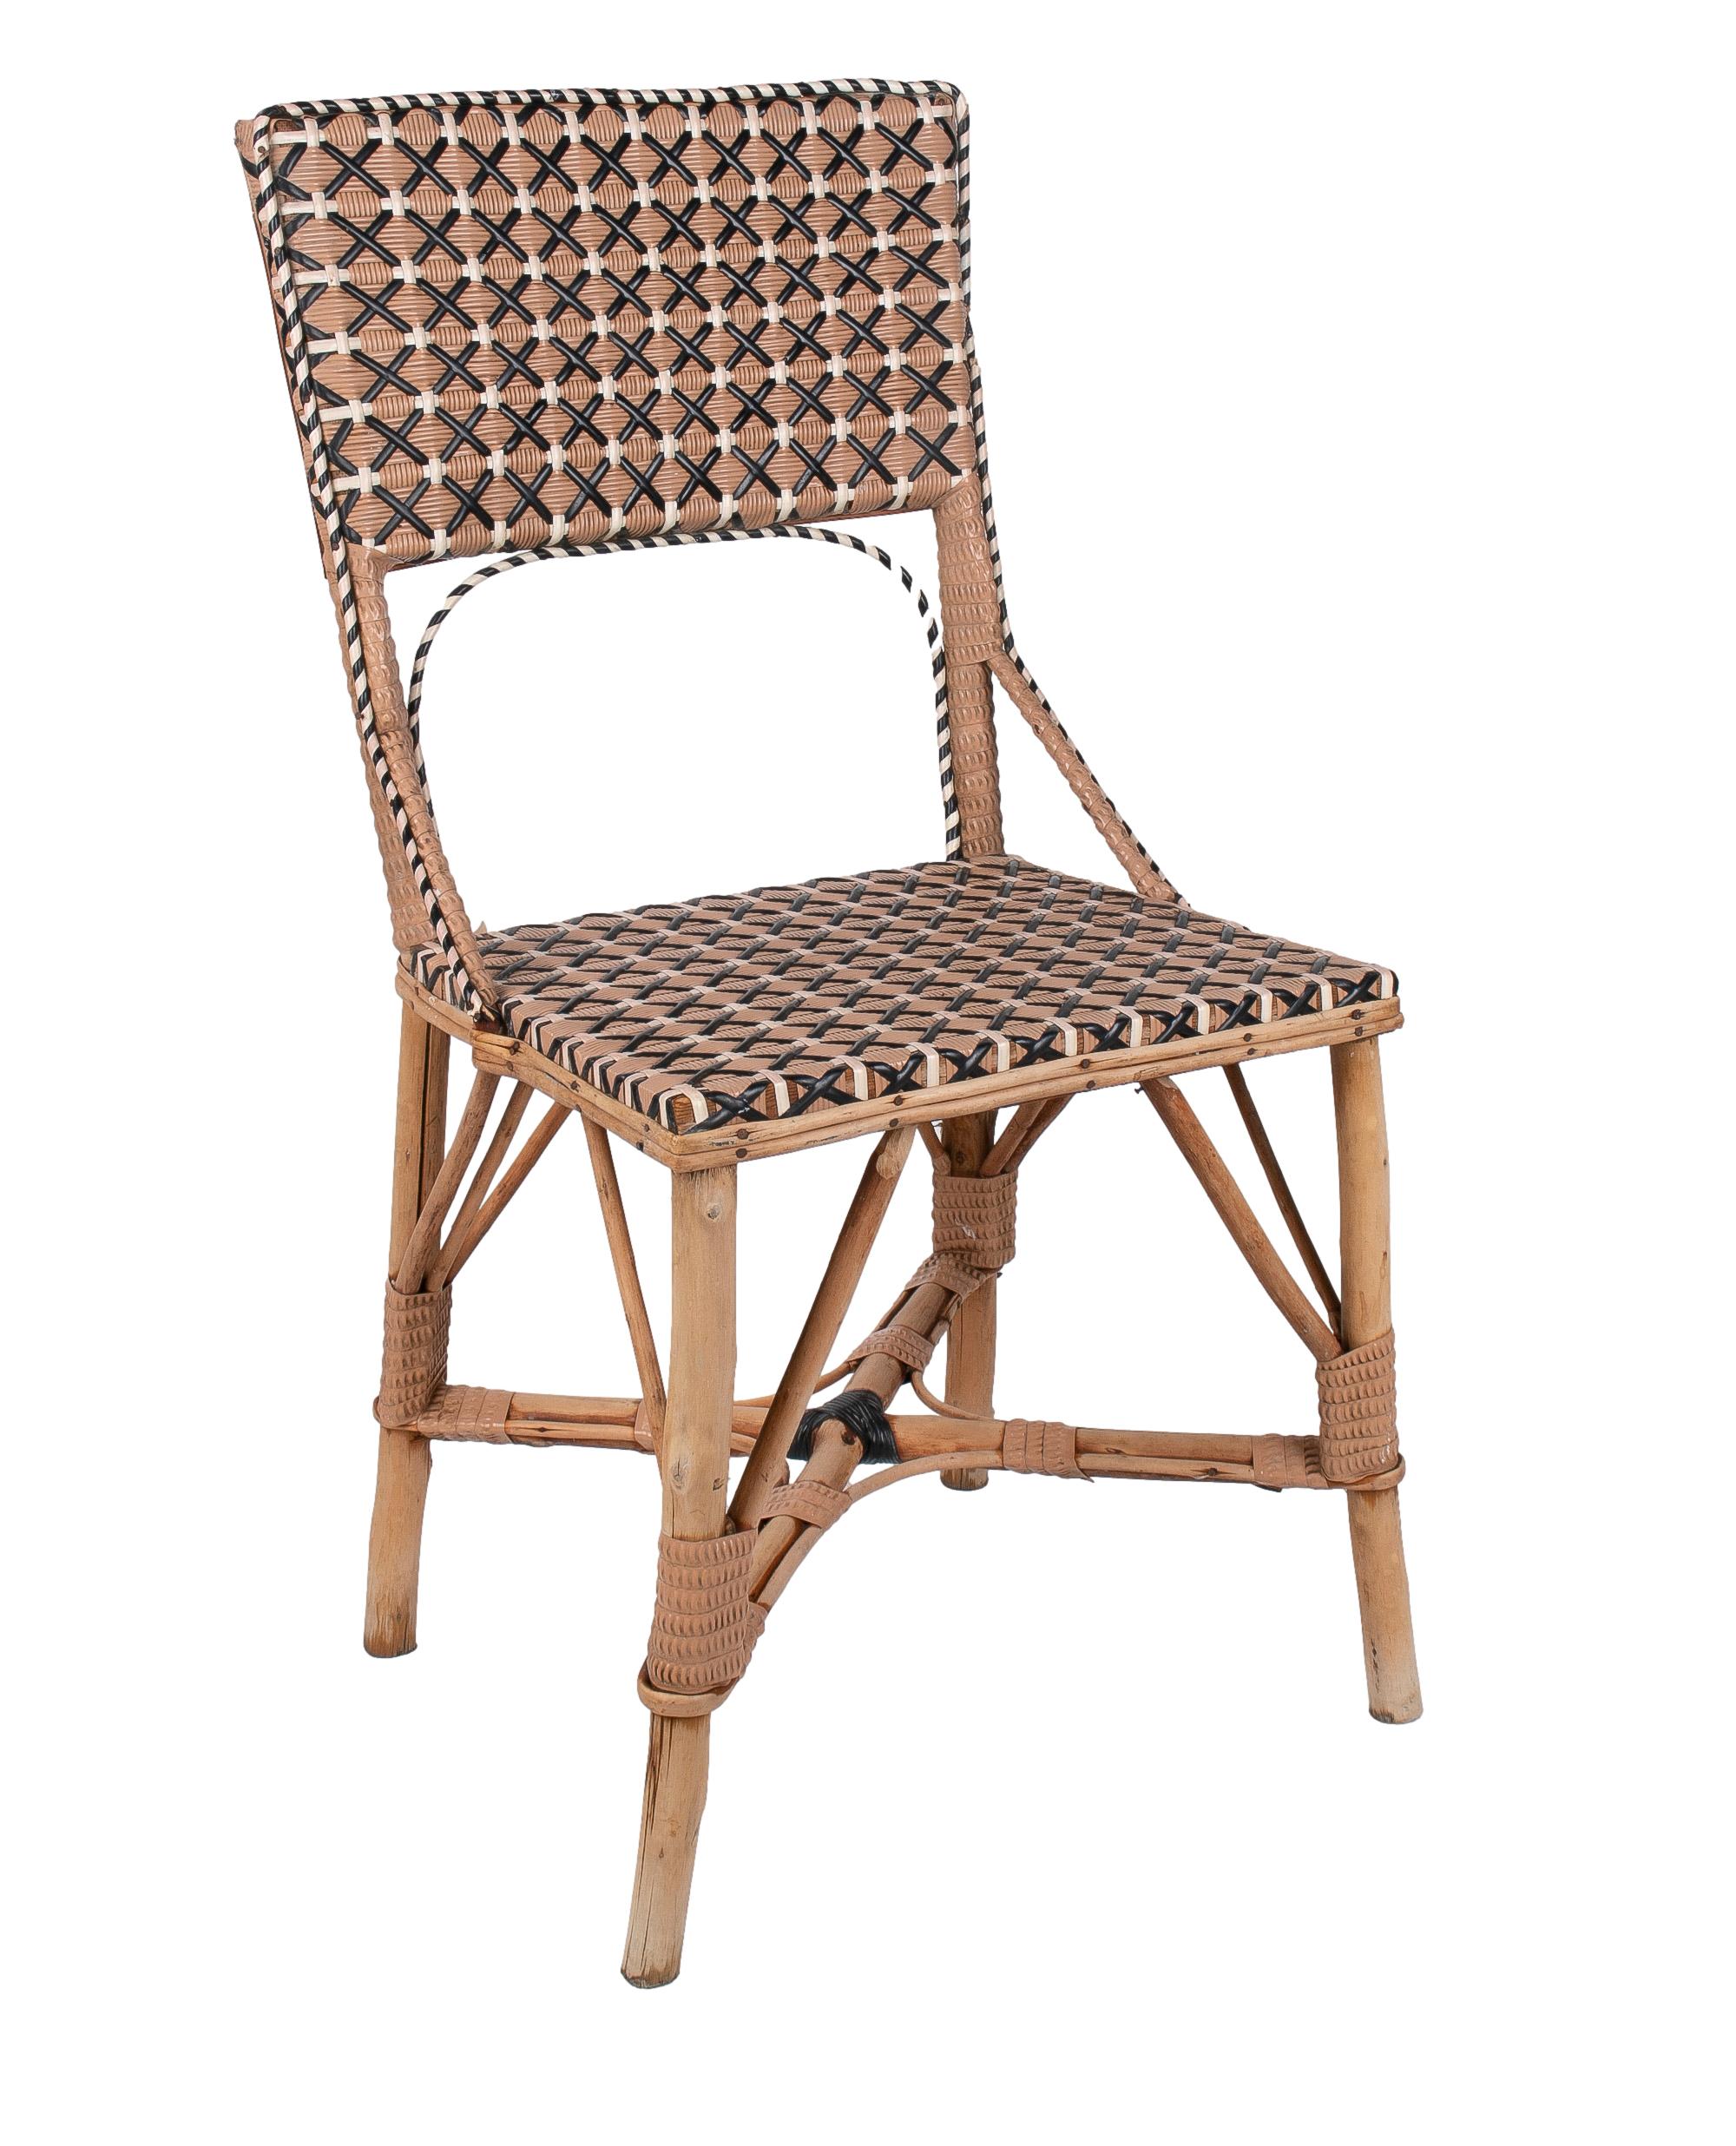 Vintage 1950s Spanish woven wicker on wood set of 2-chairs with table

Table measurements: 62 x 61 x 42cm
Chairs measurements: 87x41 x 46cm.